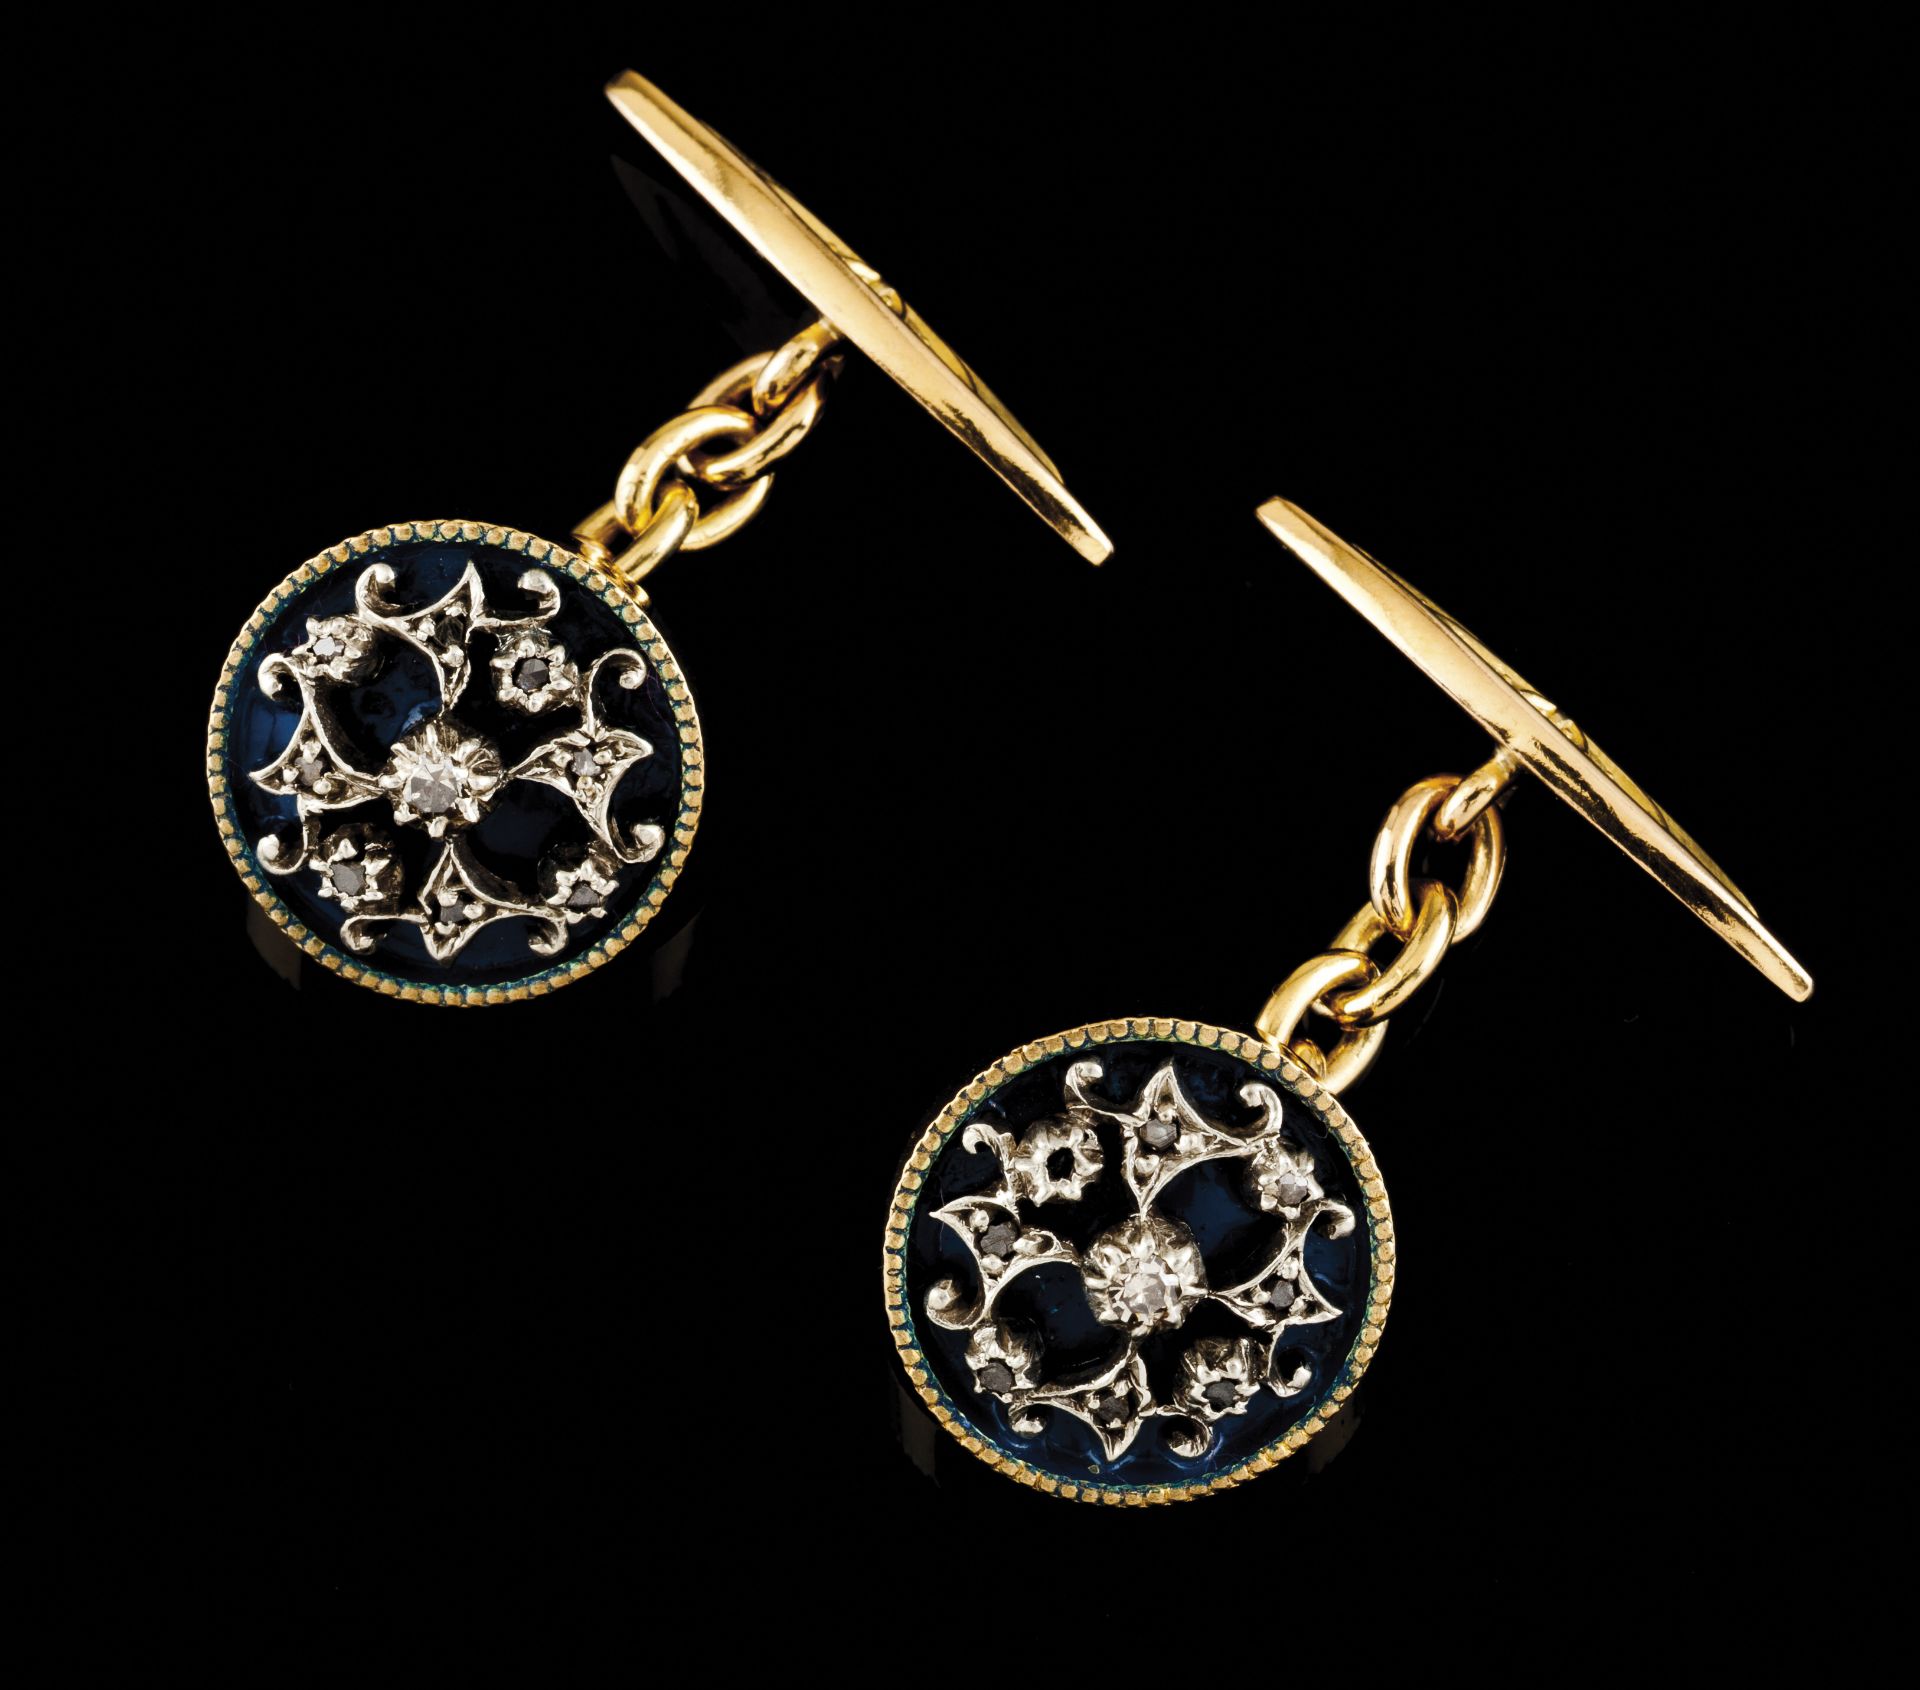 A pair of cufflinksGold and silverCircular shaped of blue enamelled background with silver applied